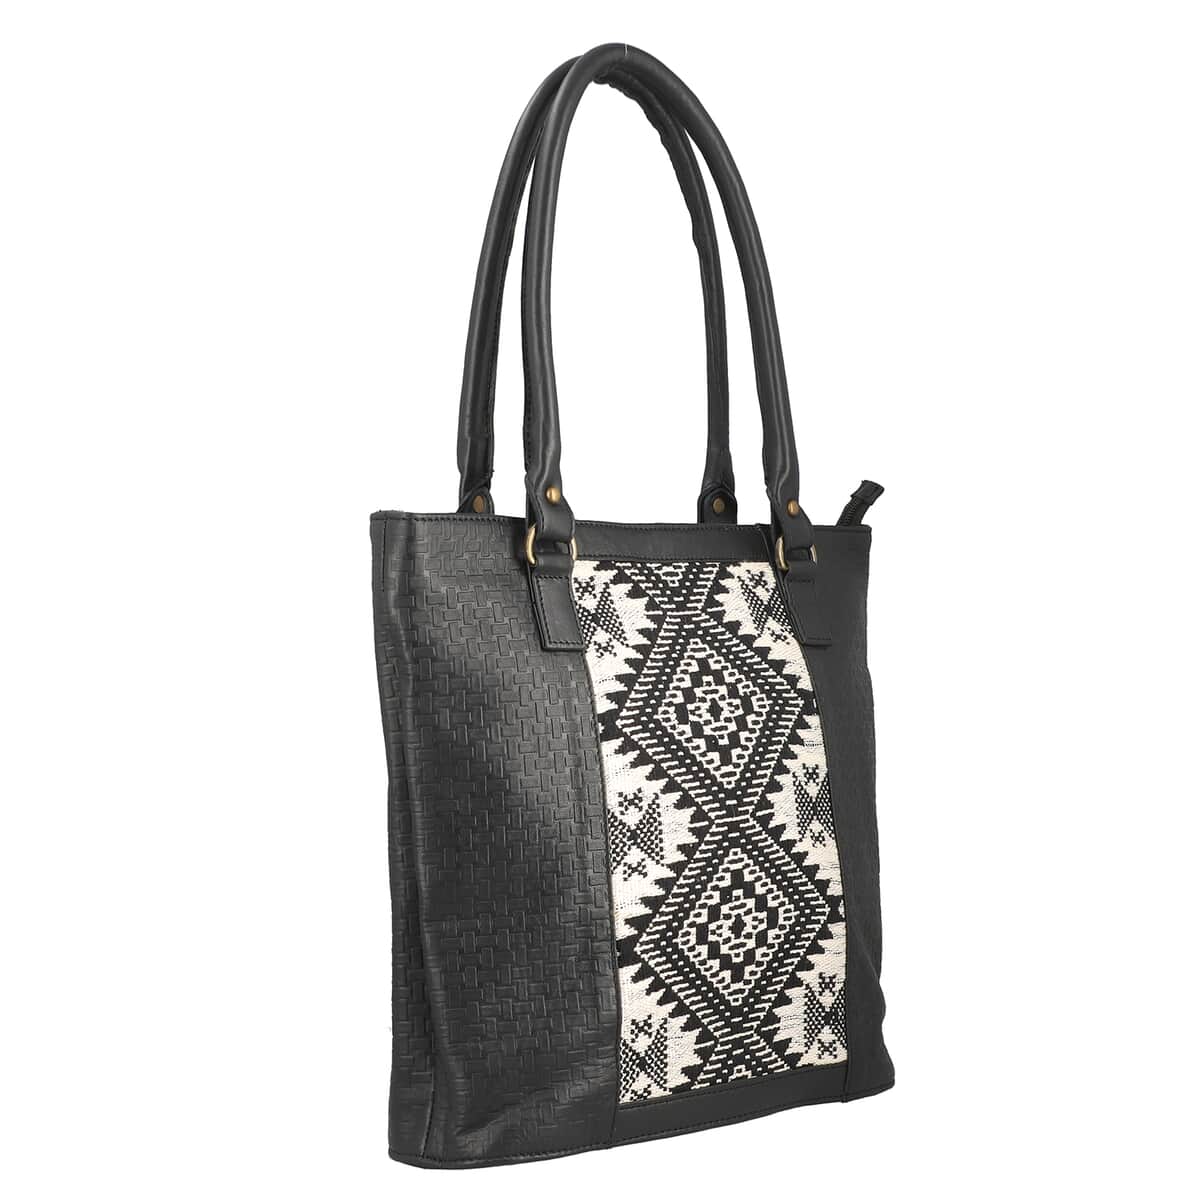 Black Genuine Leather and Colorful Fabric Shoulder Bag (11.4"x4.72"x11.8") image number 2